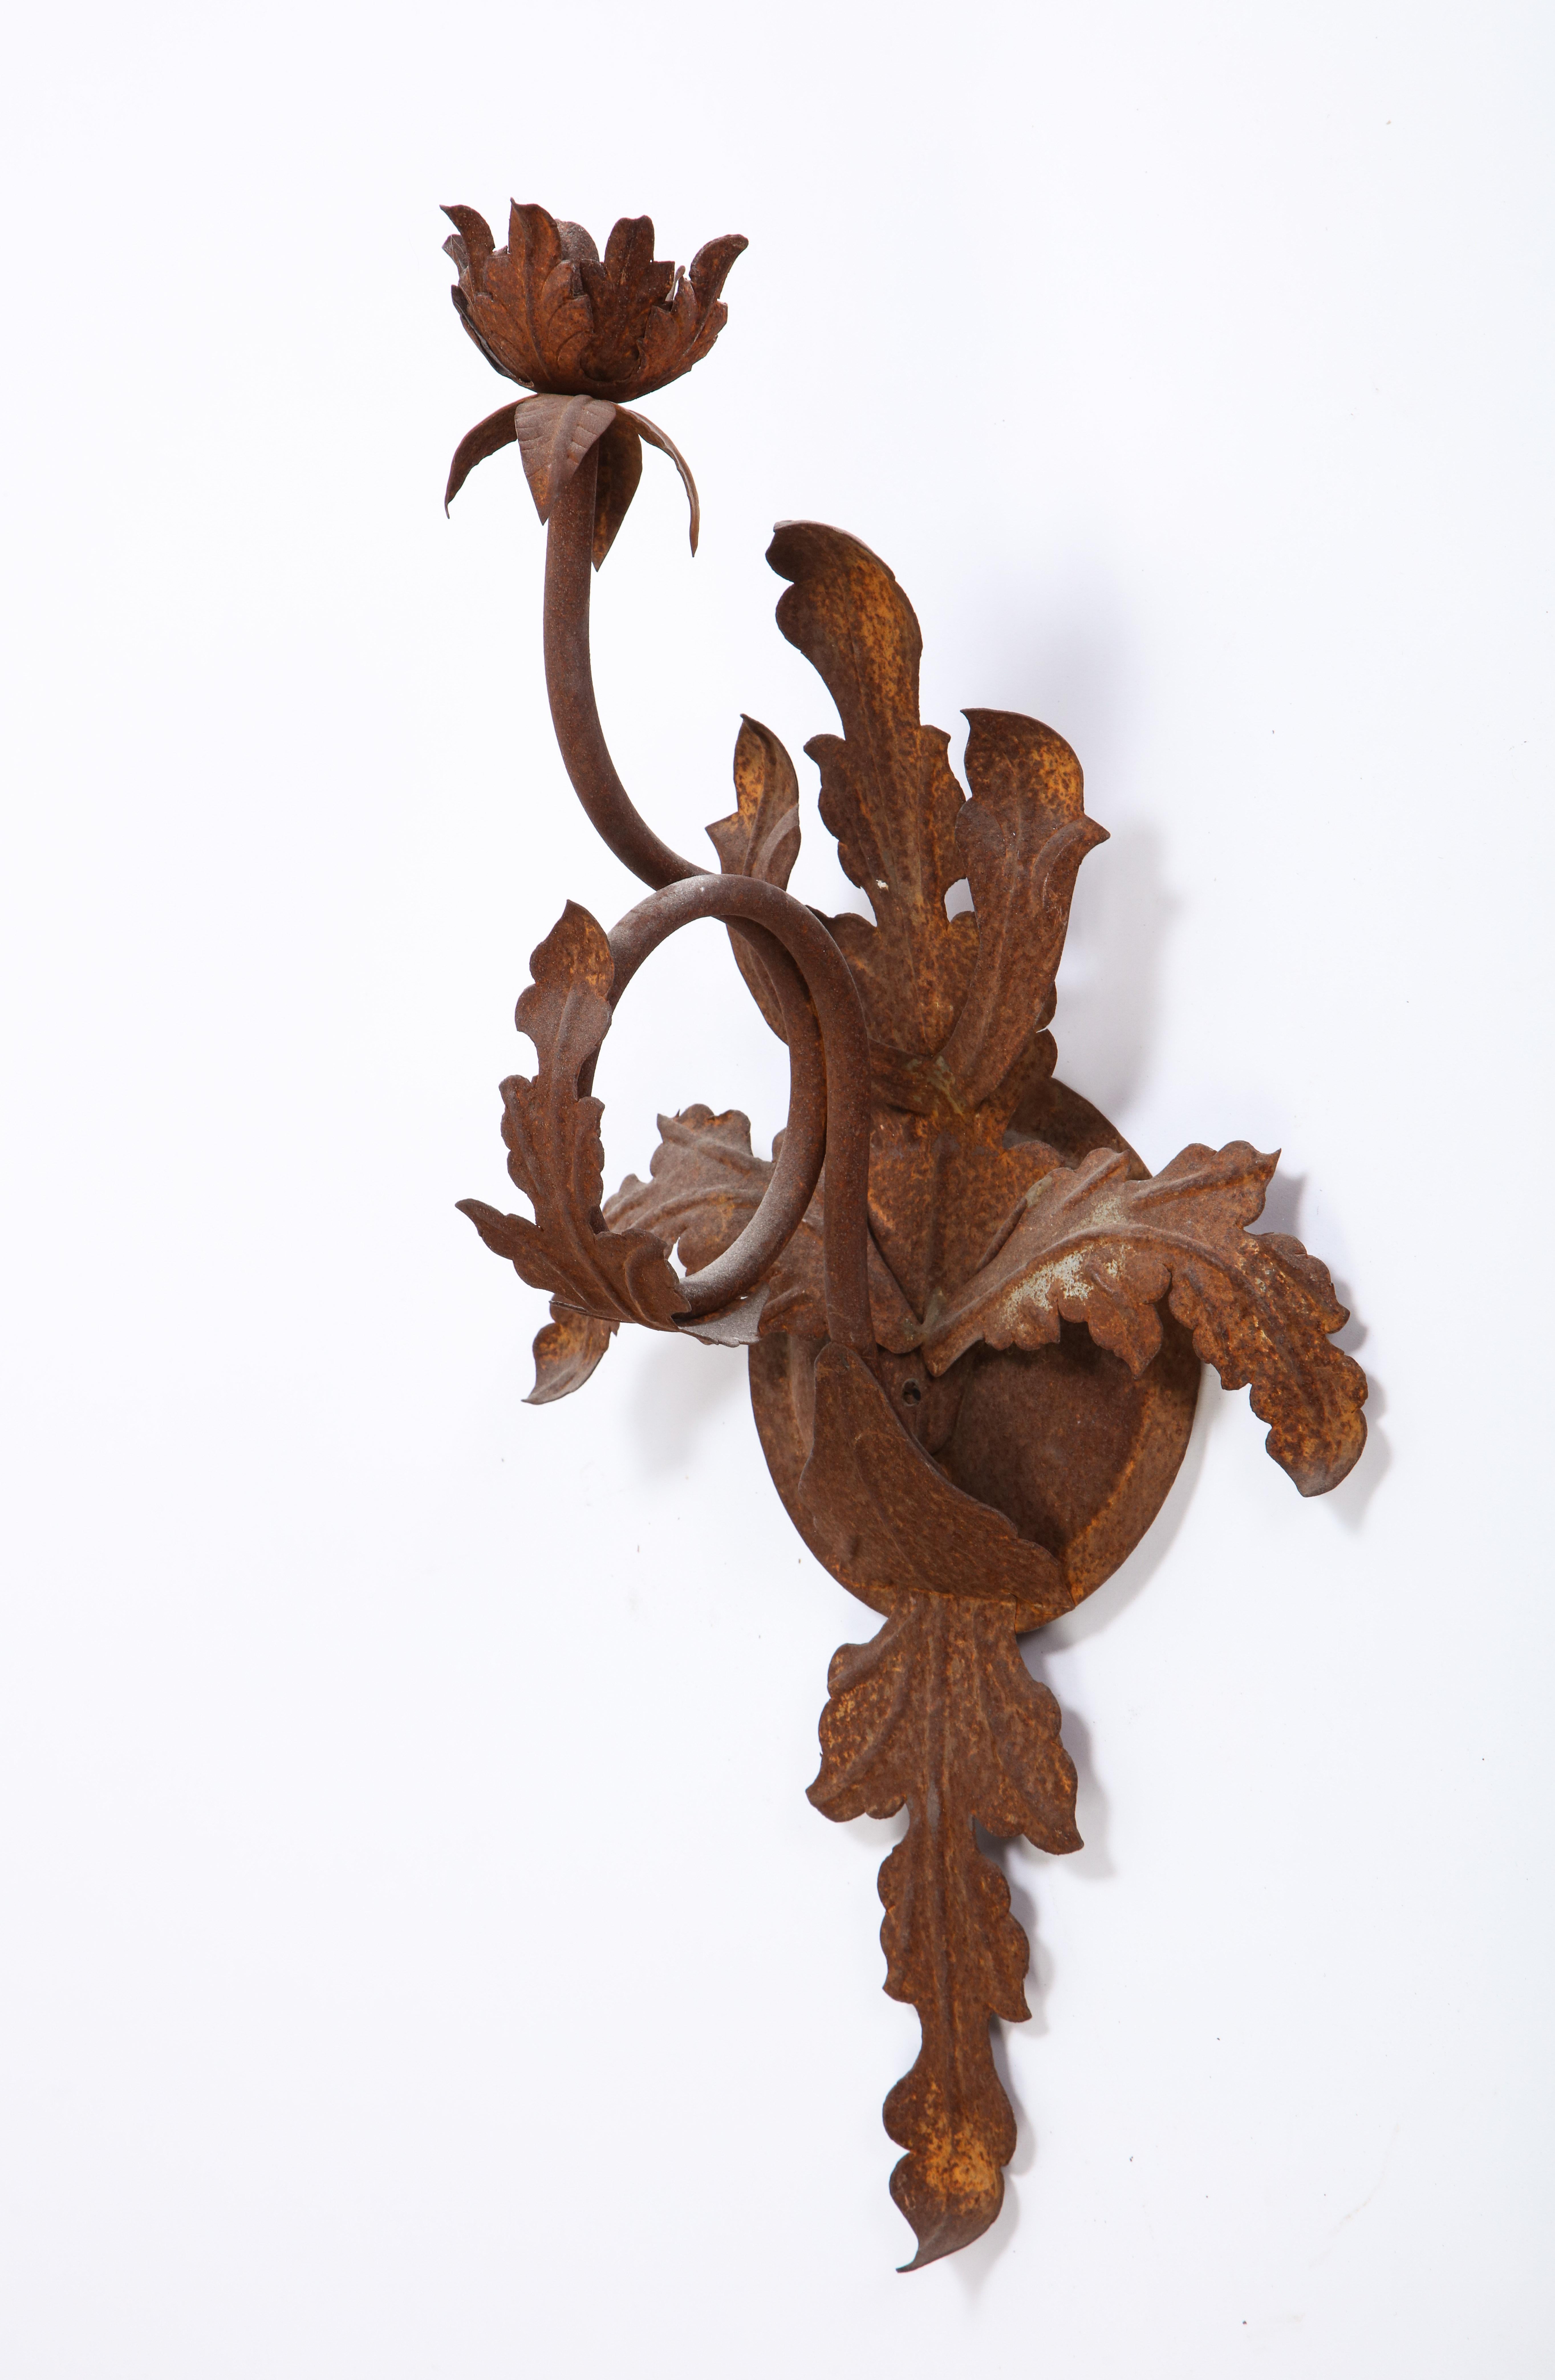 Pair of Budding Flower Wrought-Iron Sconces, 20th Century For Sale 6